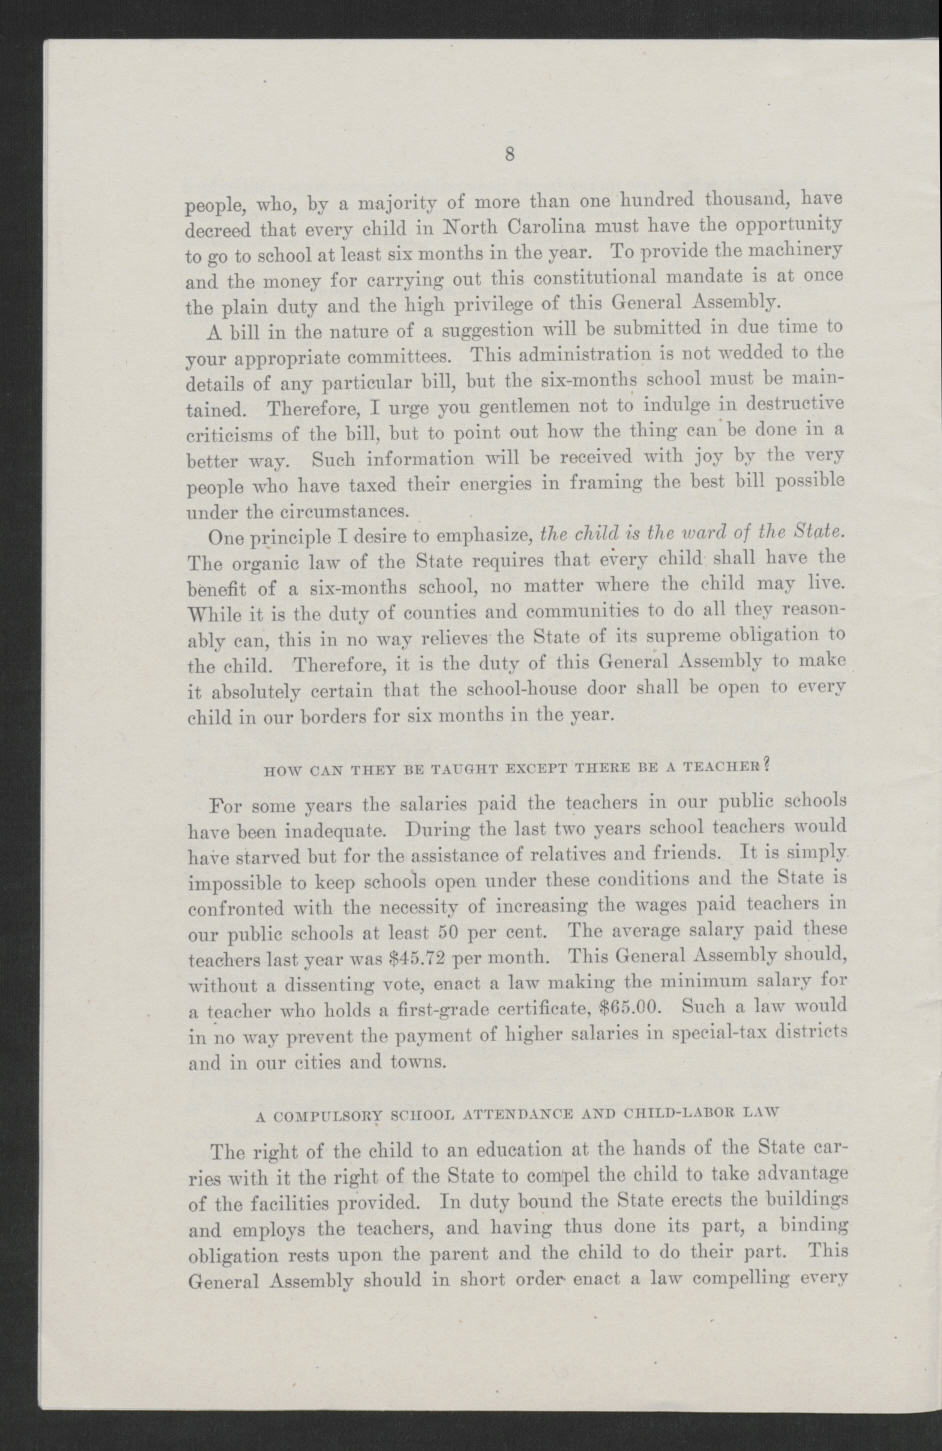 Biennial Message of Governor Thomas W. Bickett to the General Assembly, January 9, 1919, page 6